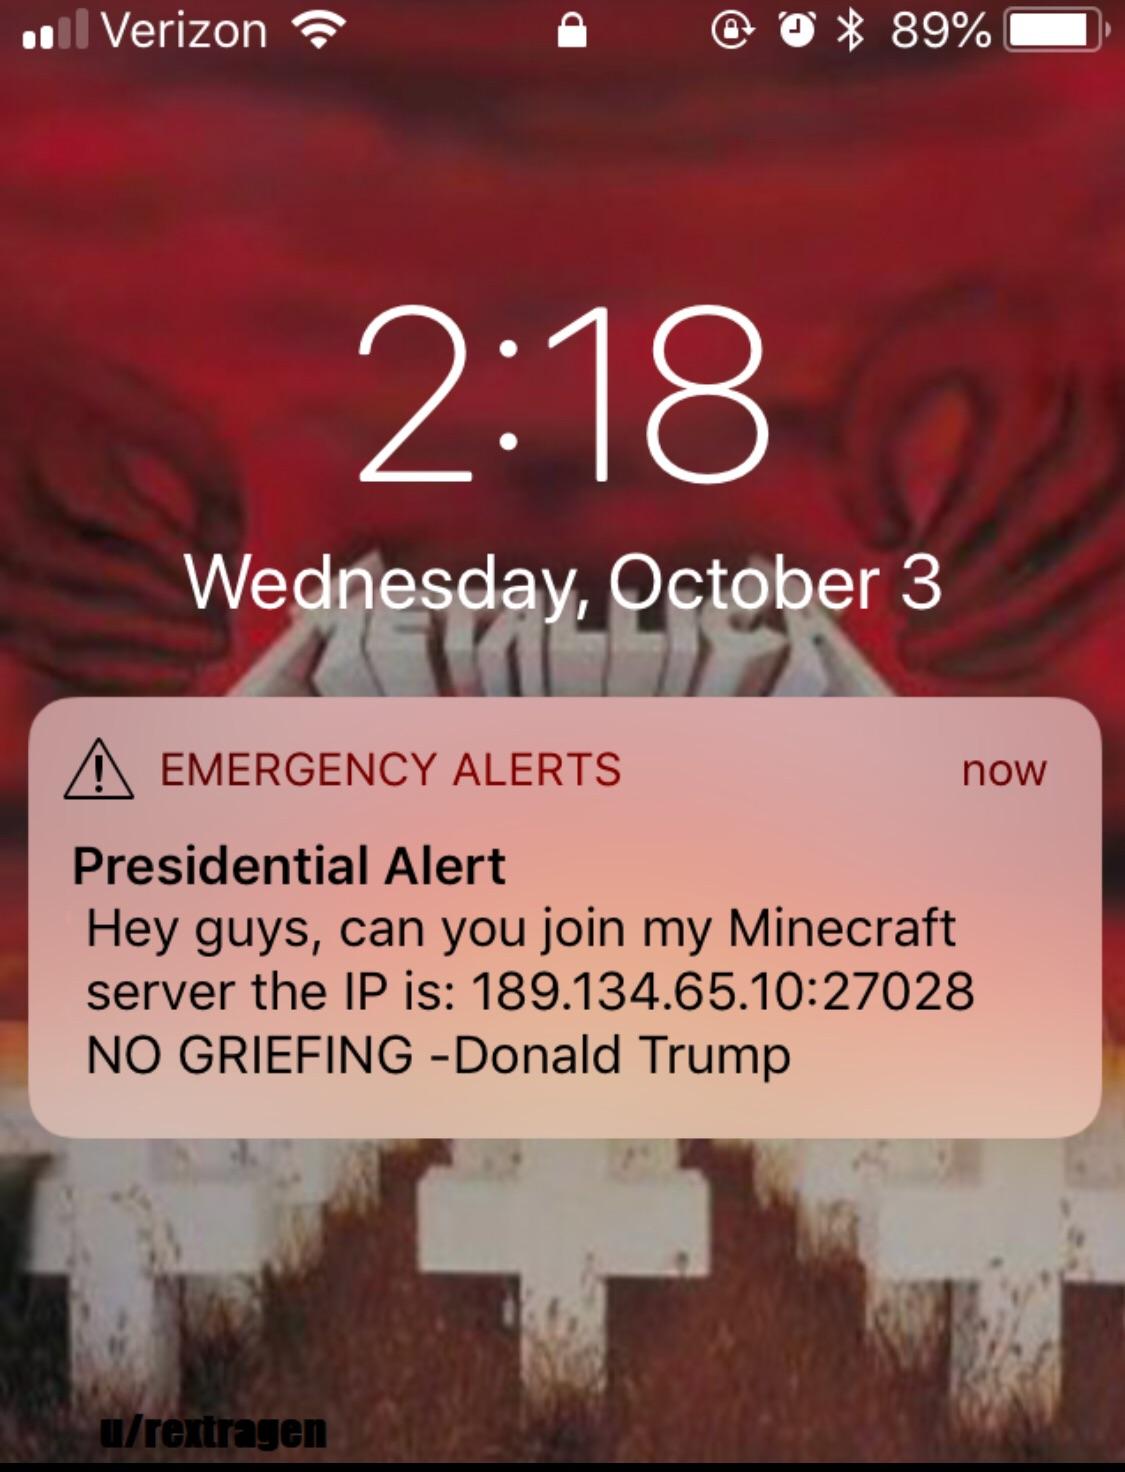 ... Verizon @ 89% Wednesday, October 3 A Emergency Alerts now Presidential Alert Hey guys, can you join my Minecraft server the Ip is 189.134.65. No Griefing Donald Trump urextragen